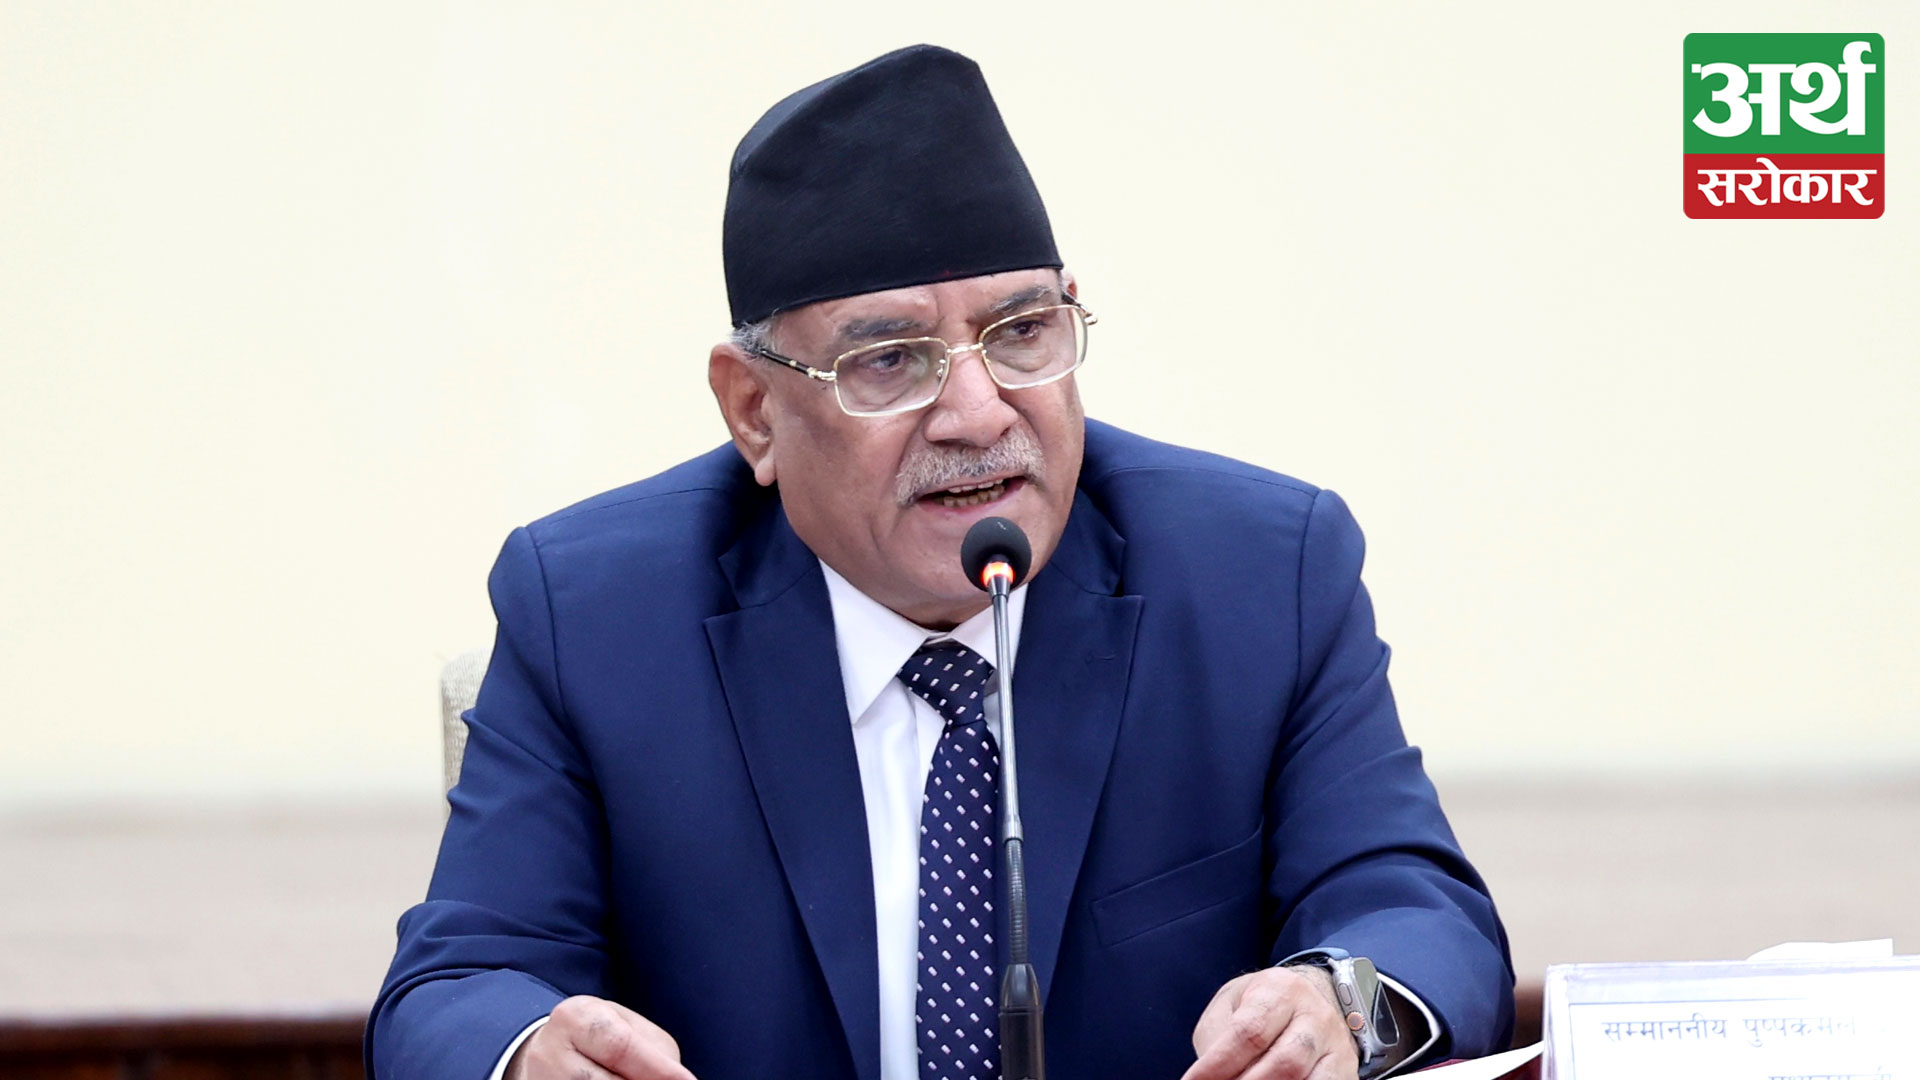 PM Dahal instructs related ministries and bodies to resolve the problems of cooperatives